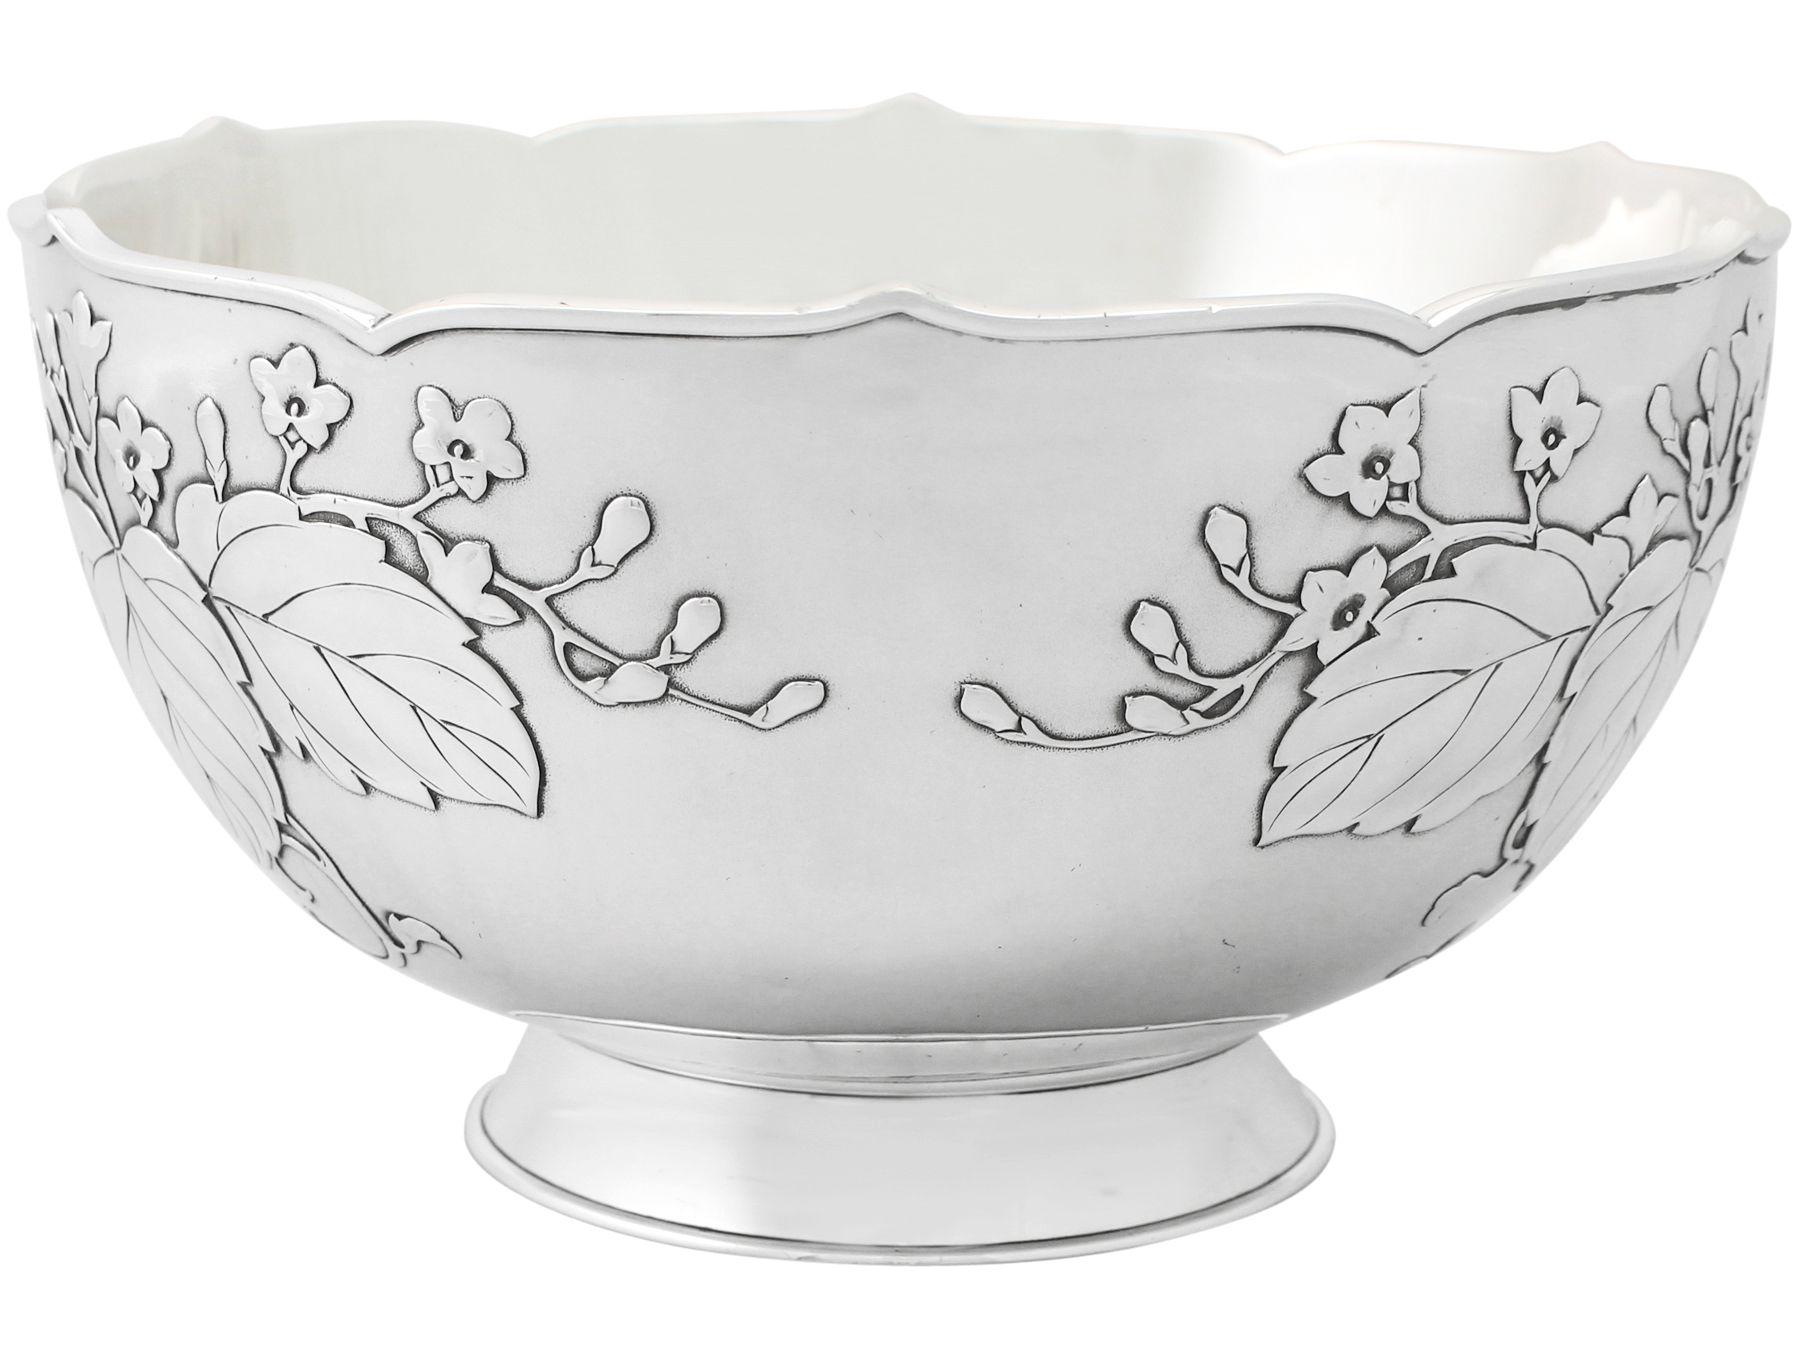 An exceptional, fine and impressive antique Japanese pure silver presentation bowl; part of our Asian silverware collection.

This exceptional antique Japanese silver bowl has a circular rounded form onto a plain circular spreading collet